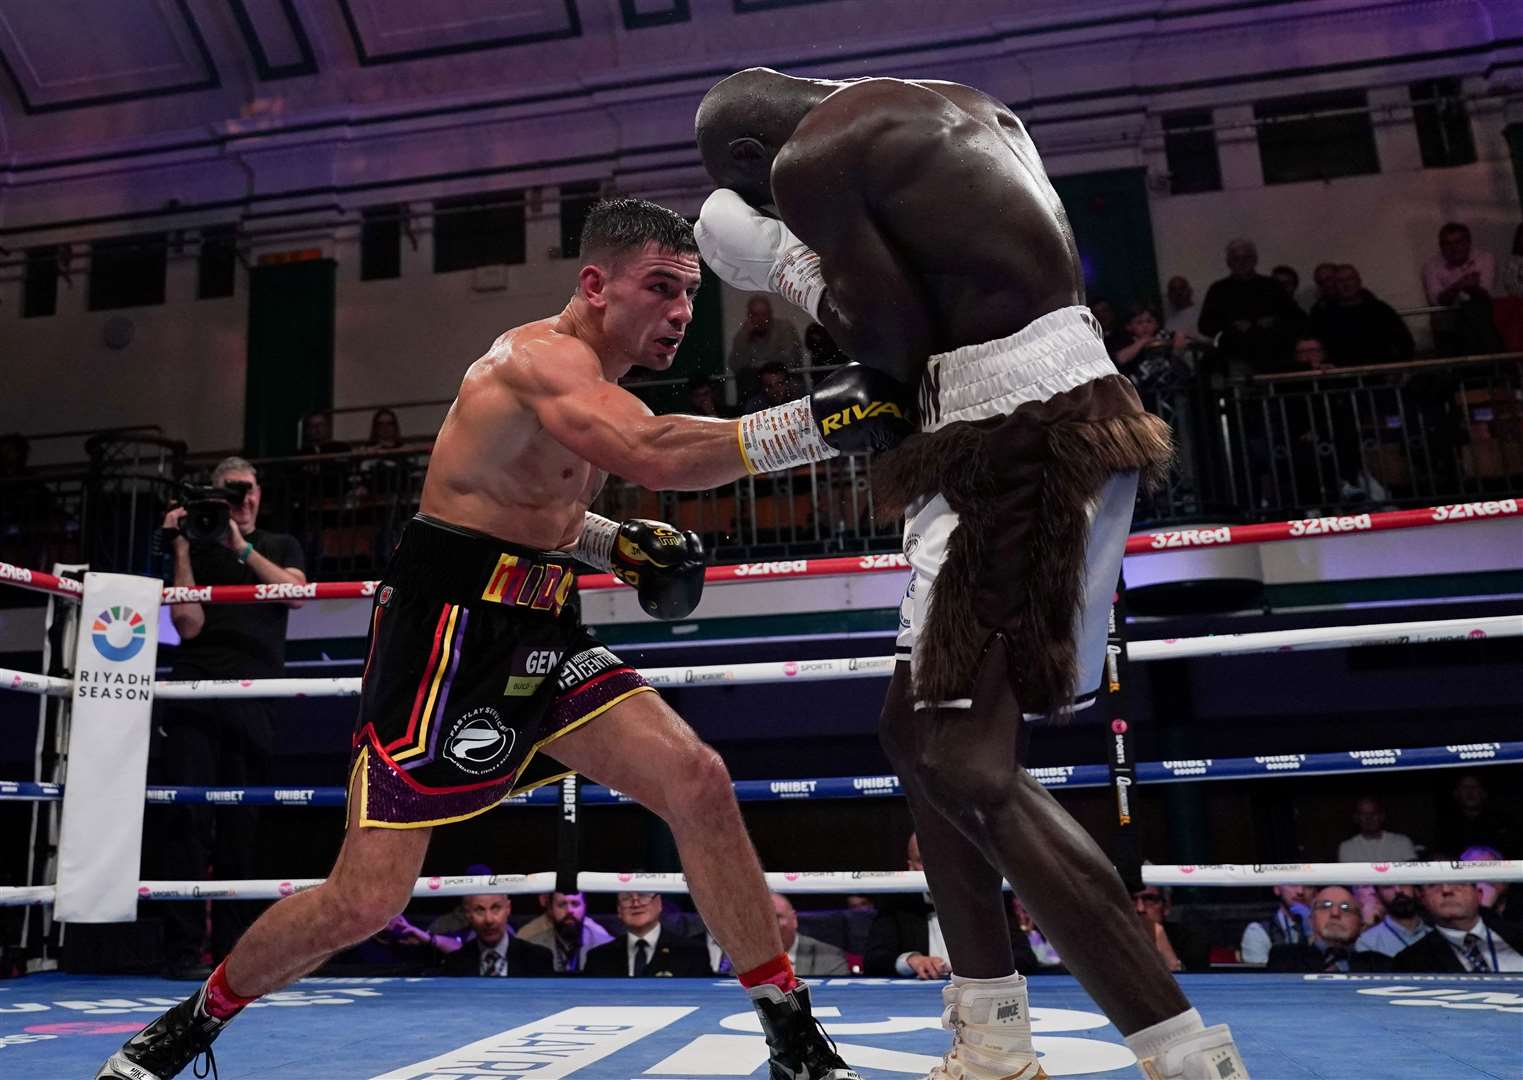 Maidstone boxer Sam Noakes lands a telling body shot on Yvan Mendy. Picture: Stephen Dunkley / Queensberry Promotions